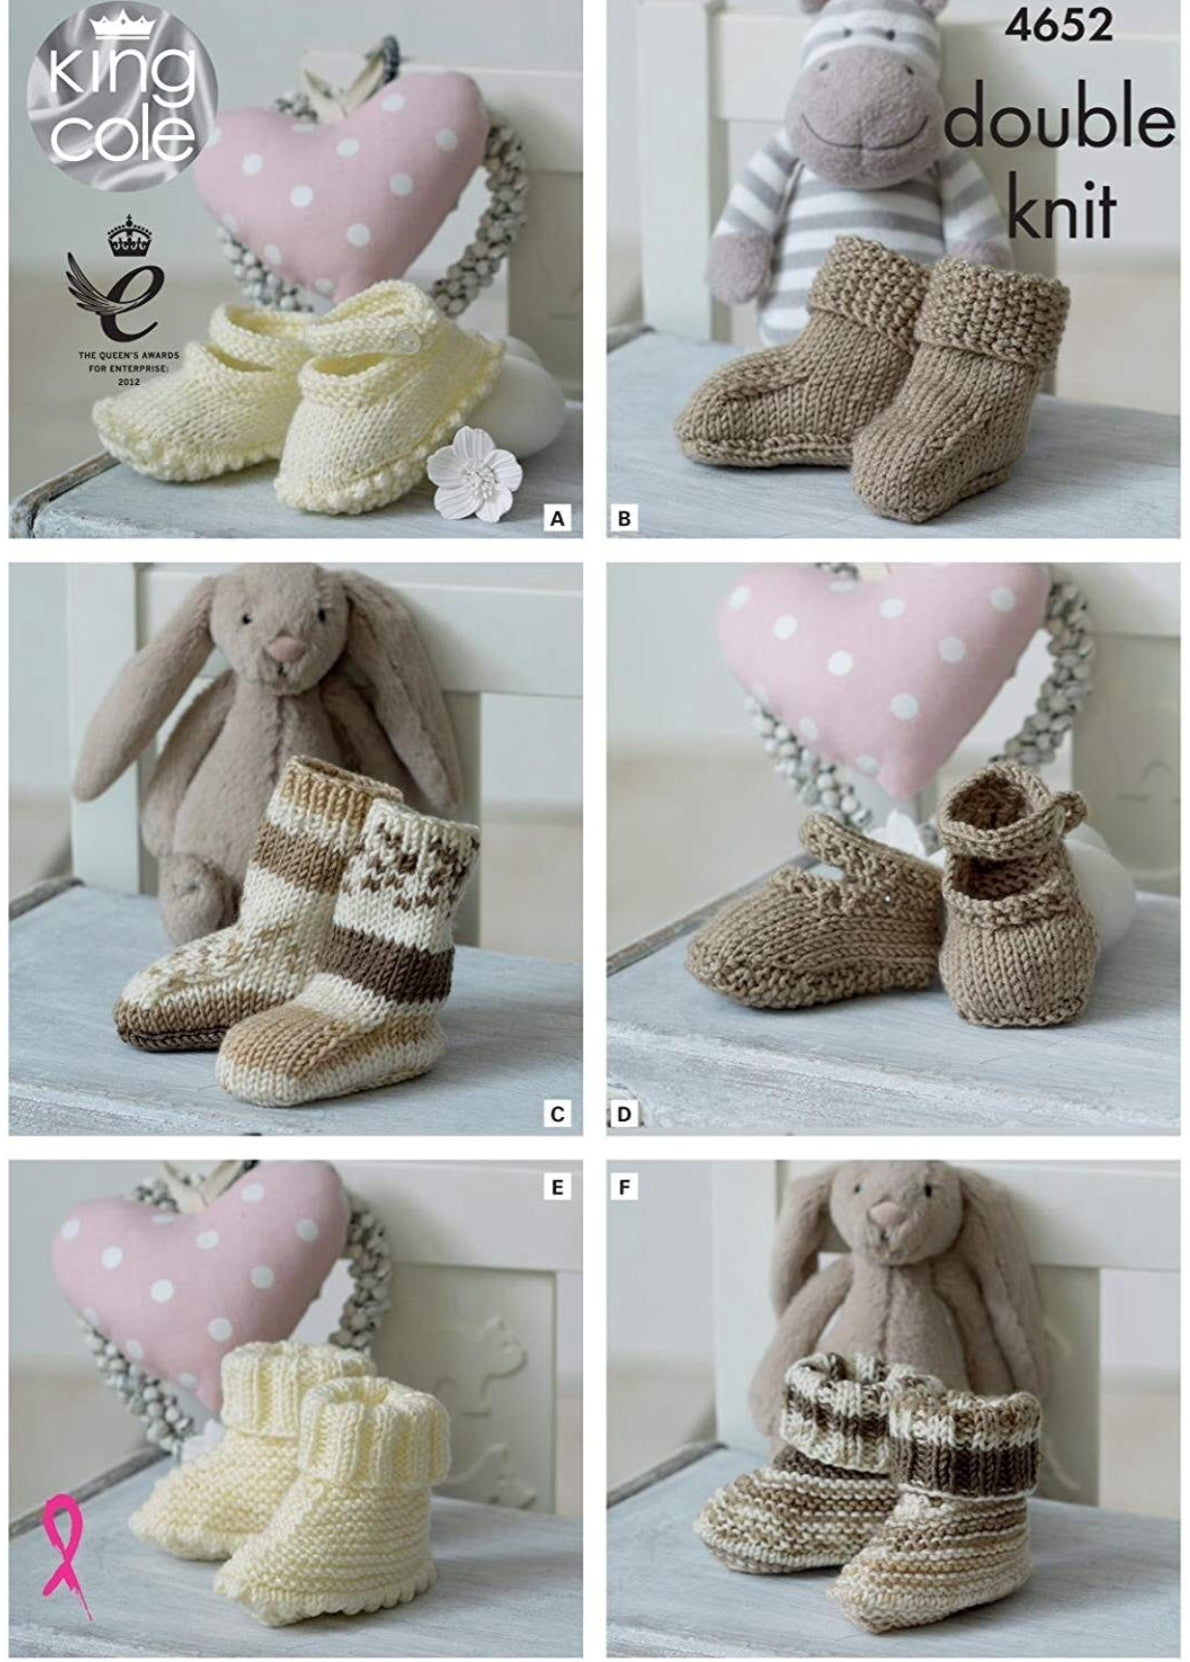 King Cole Pattern 4652 Baby Socks, Booties and Shoes in Cherish and Cherished DK